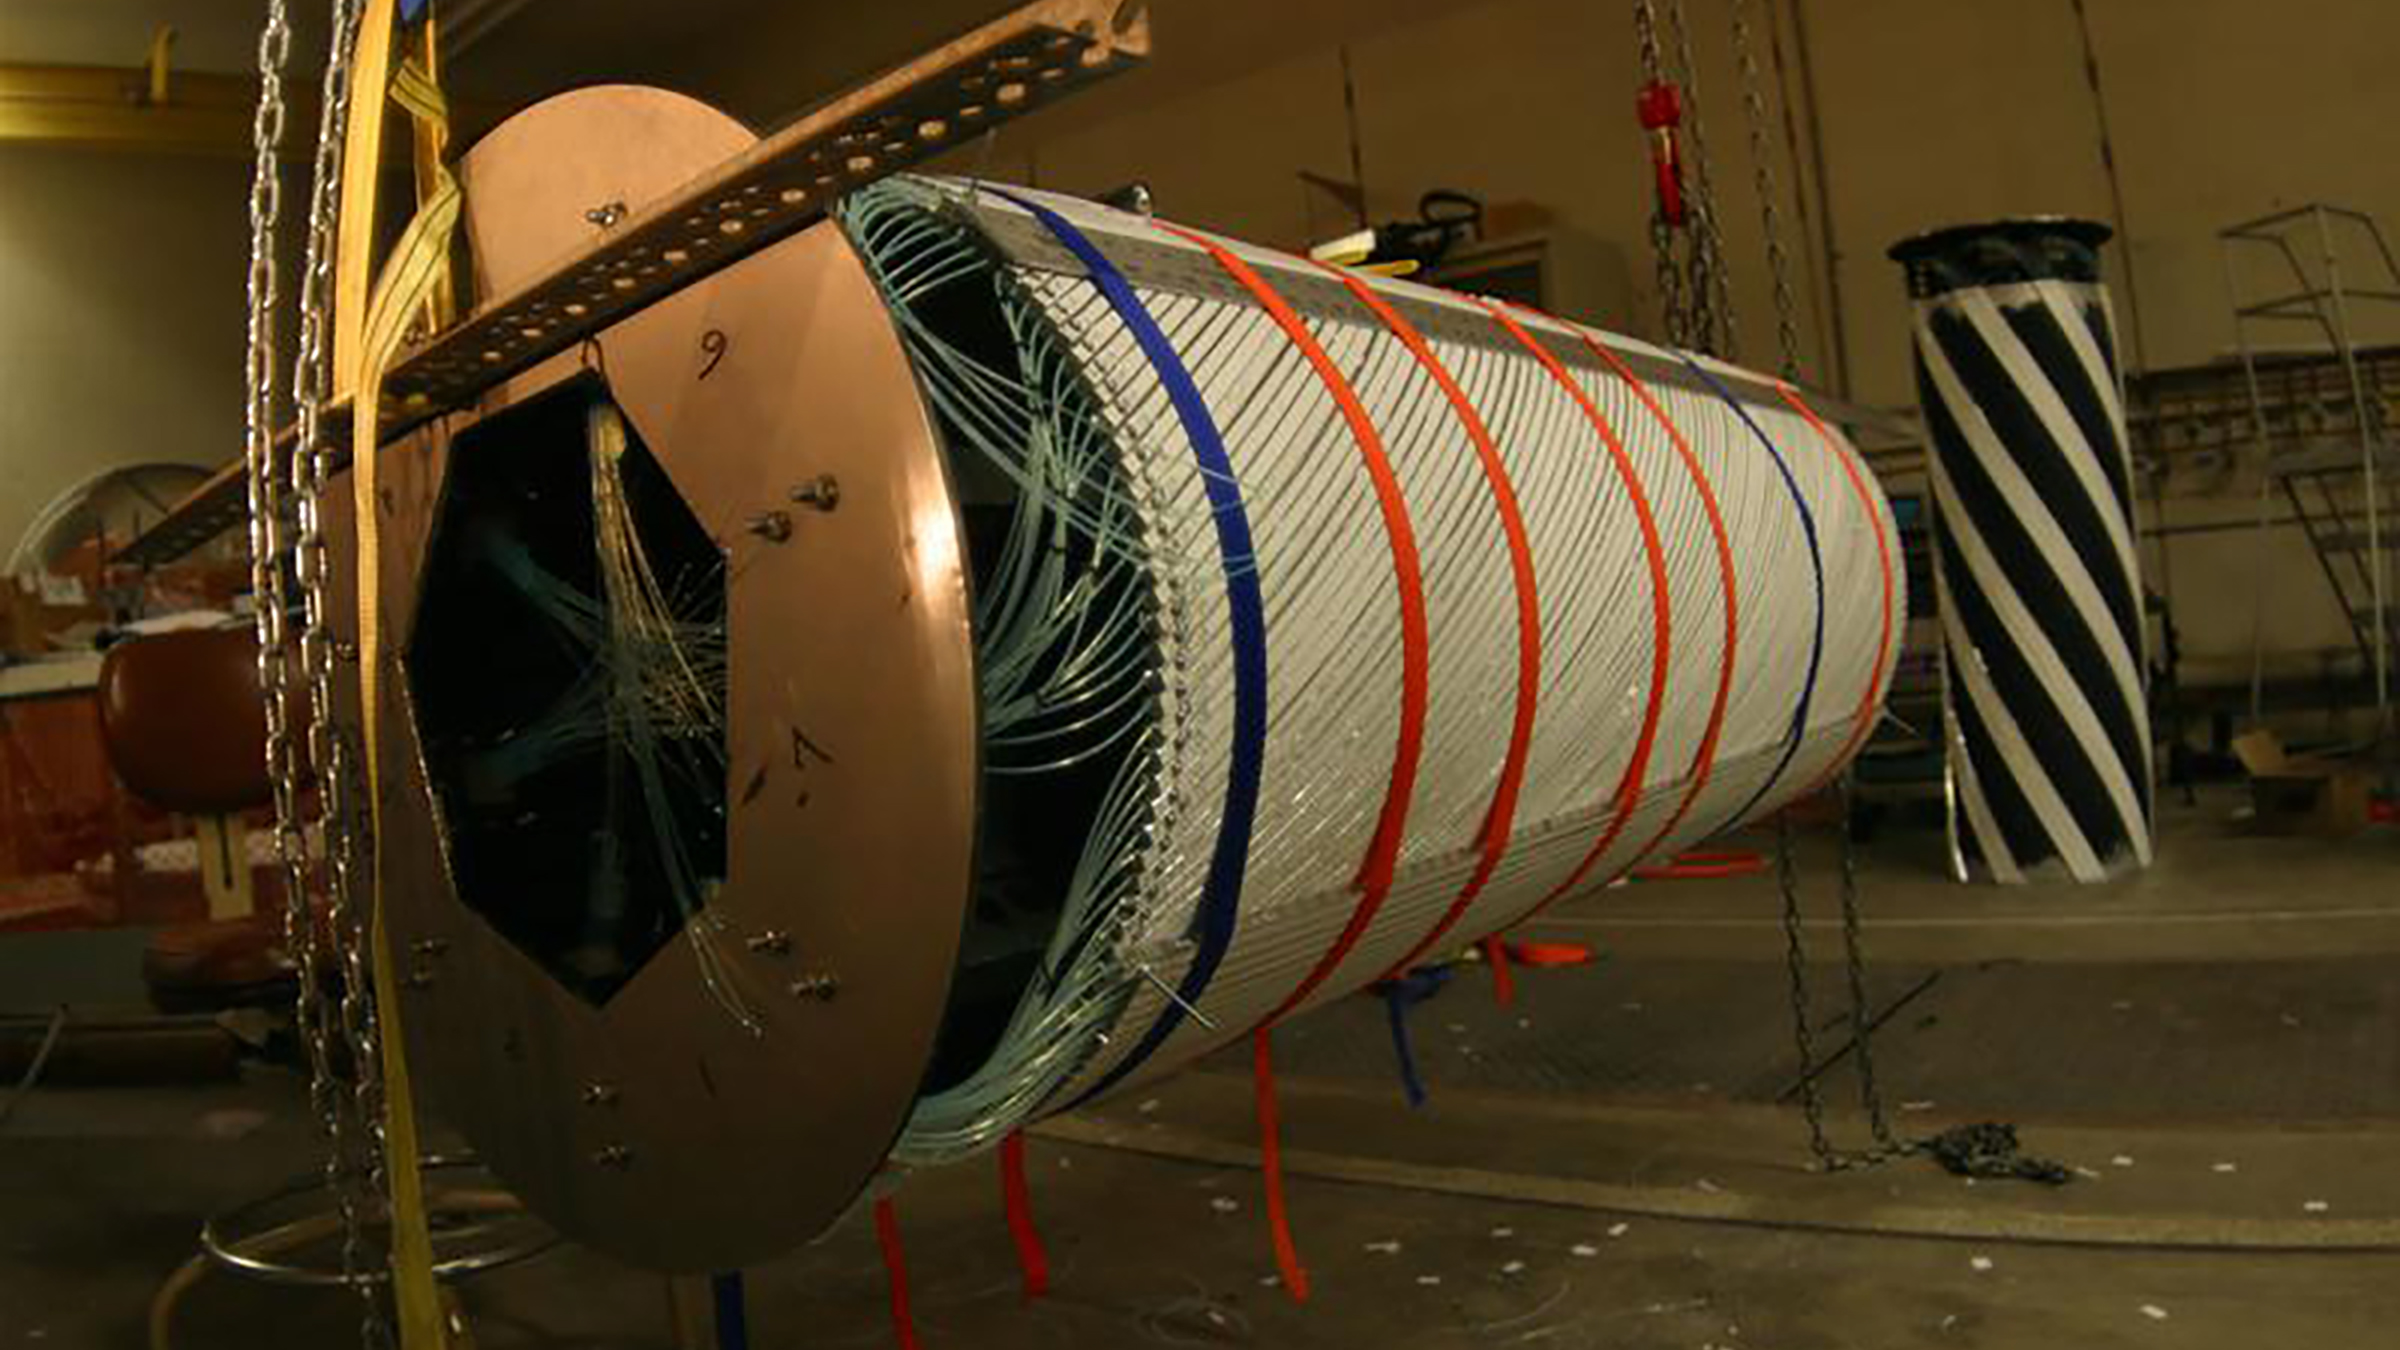 A large cylinder-shaped piece of scientific equipment hangs from chains